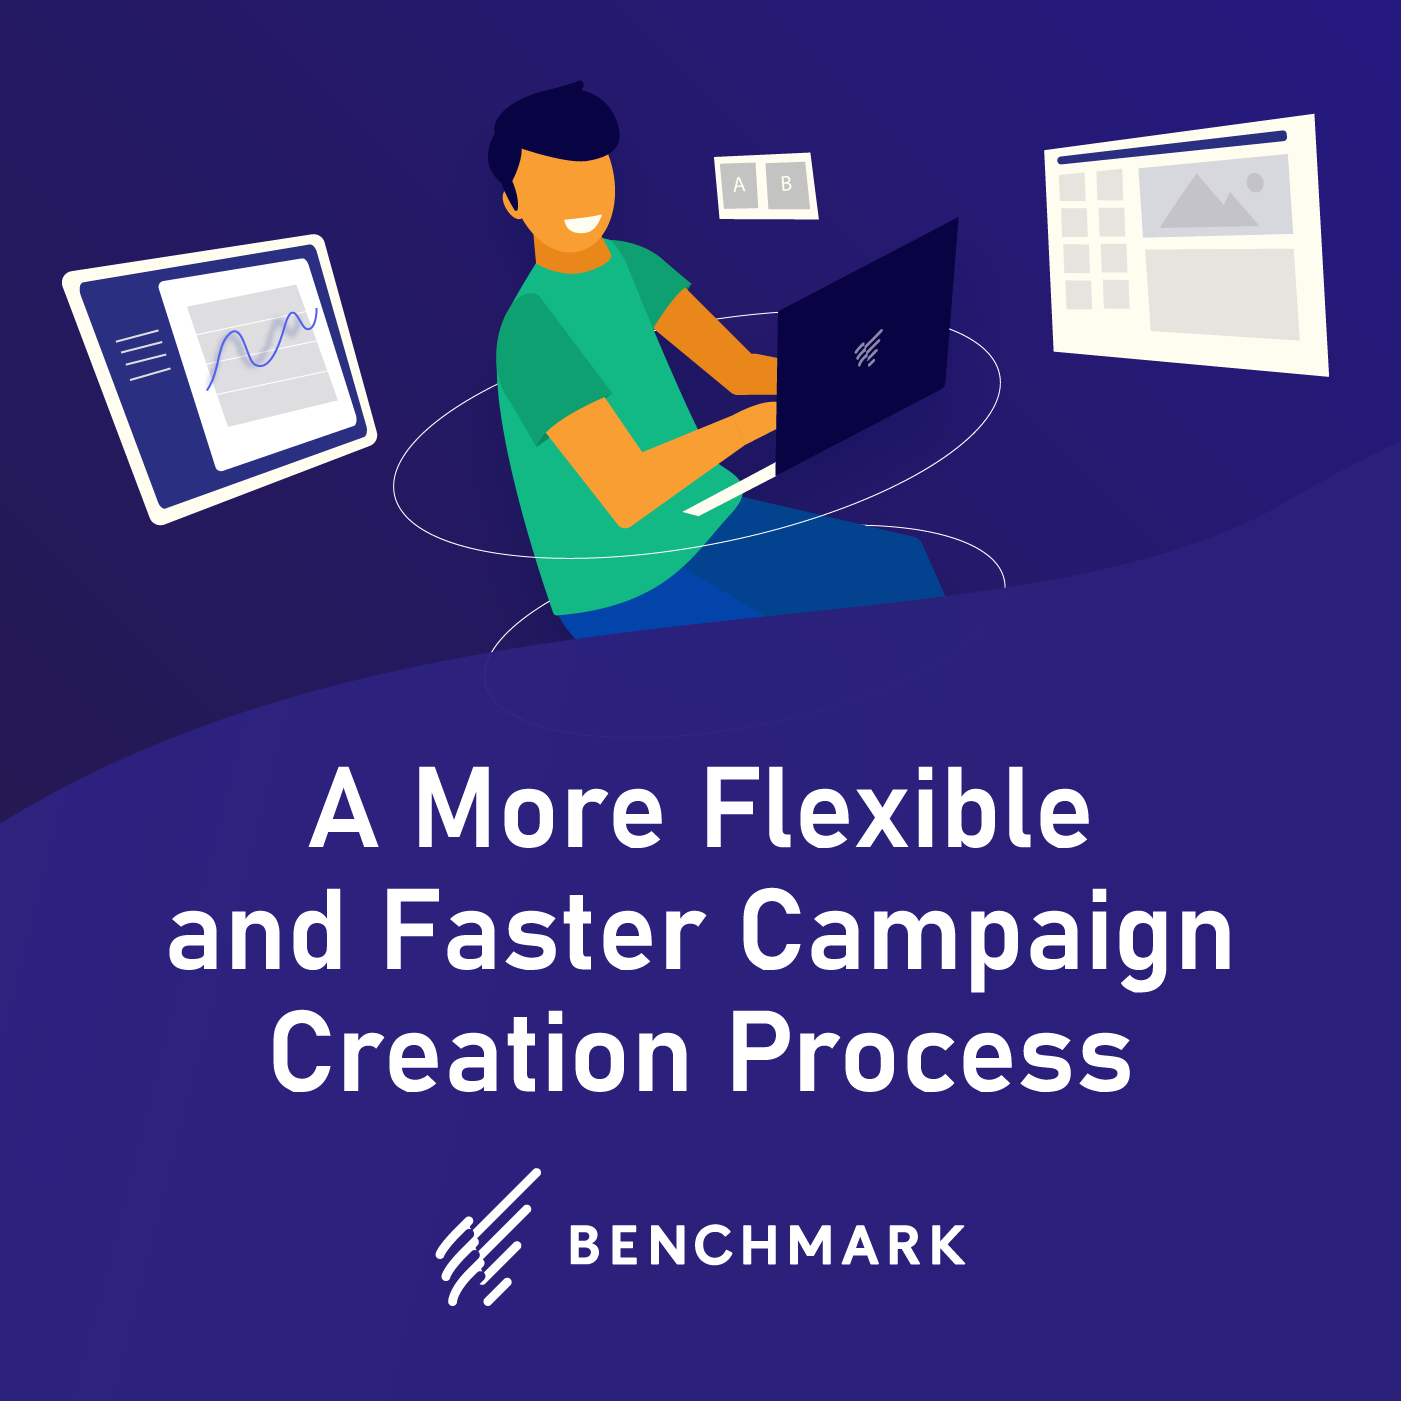 Inside Look: A More Flexible and Faster Campaign Creation Process